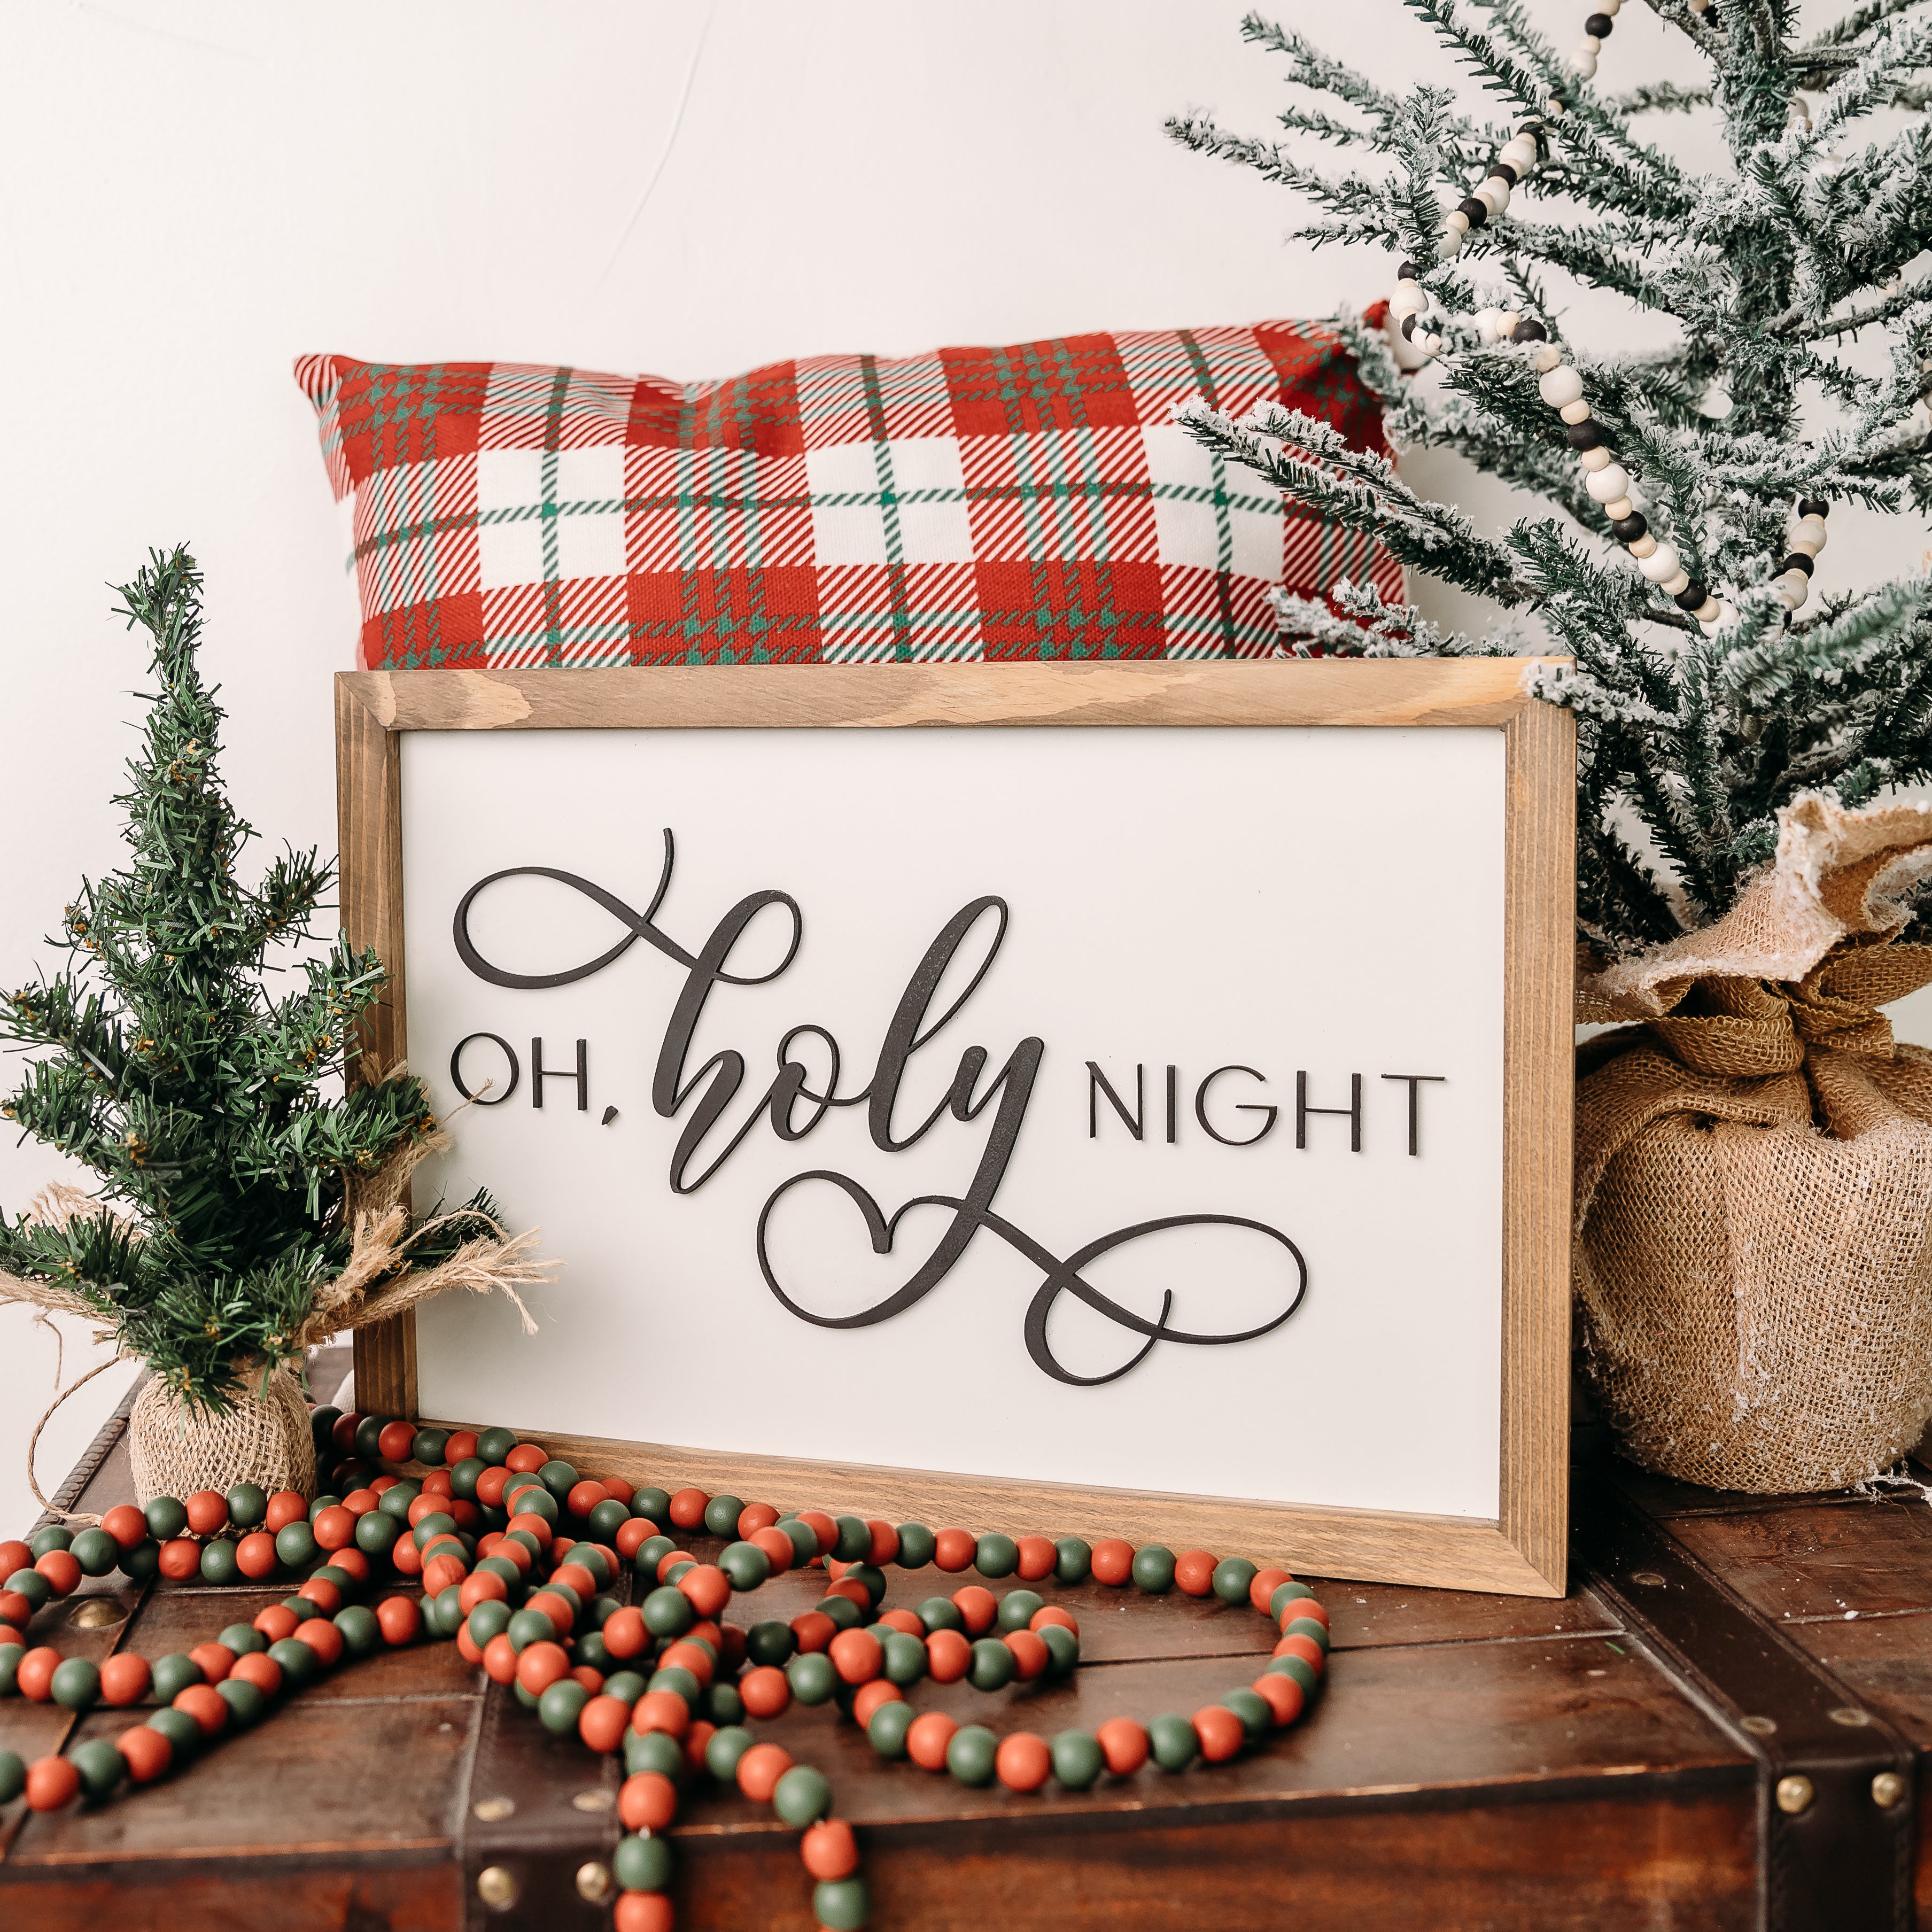 Oh Holy Night with Nativity, 11x11 inch Wood Sign